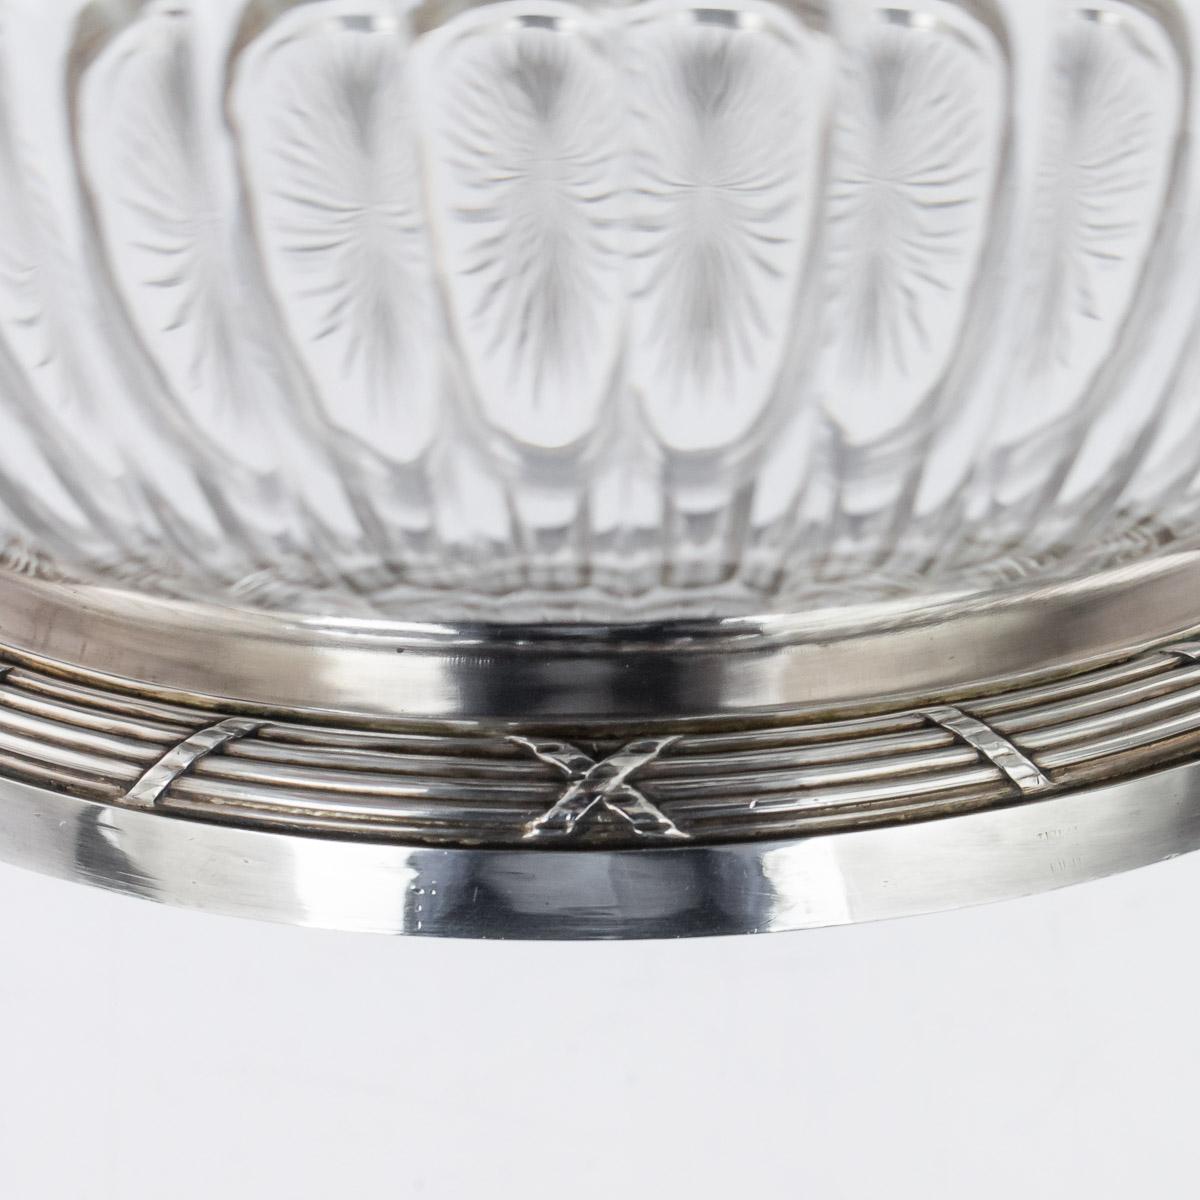 20th Century French Empire Solid Silver & Glass Bowl, Paris, c.1900 For Sale 3